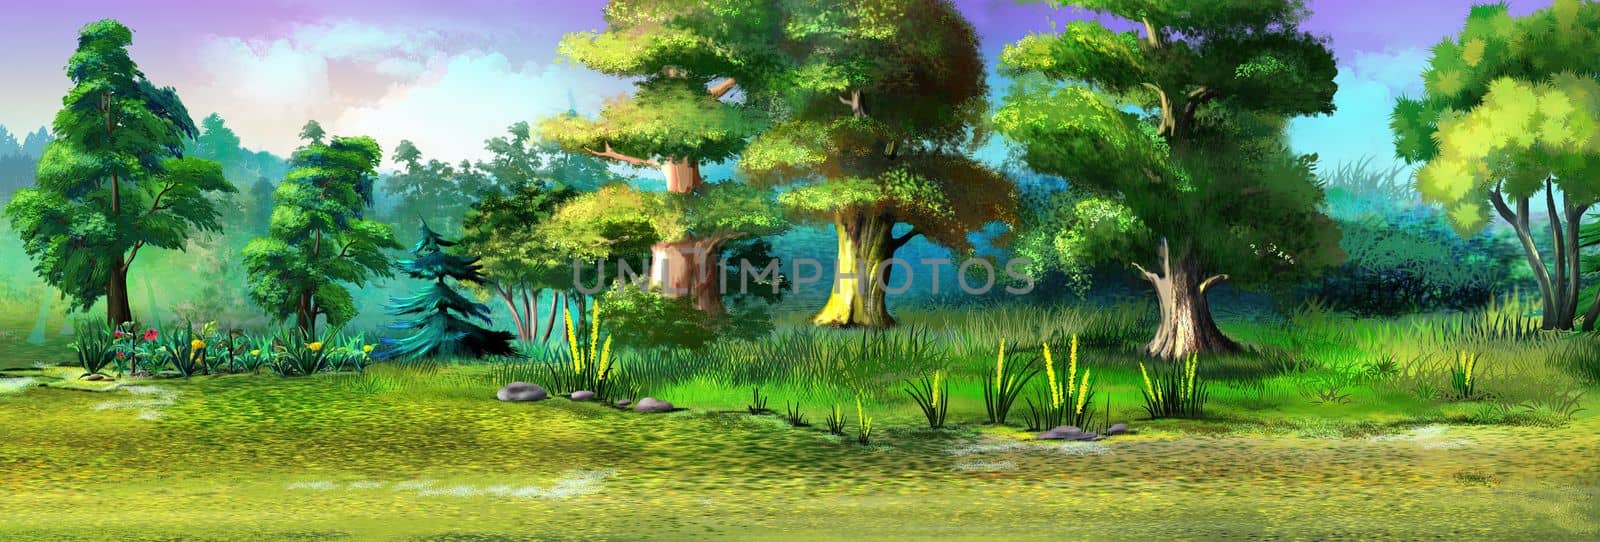 Deciduous forest in summer illustration by Multipedia